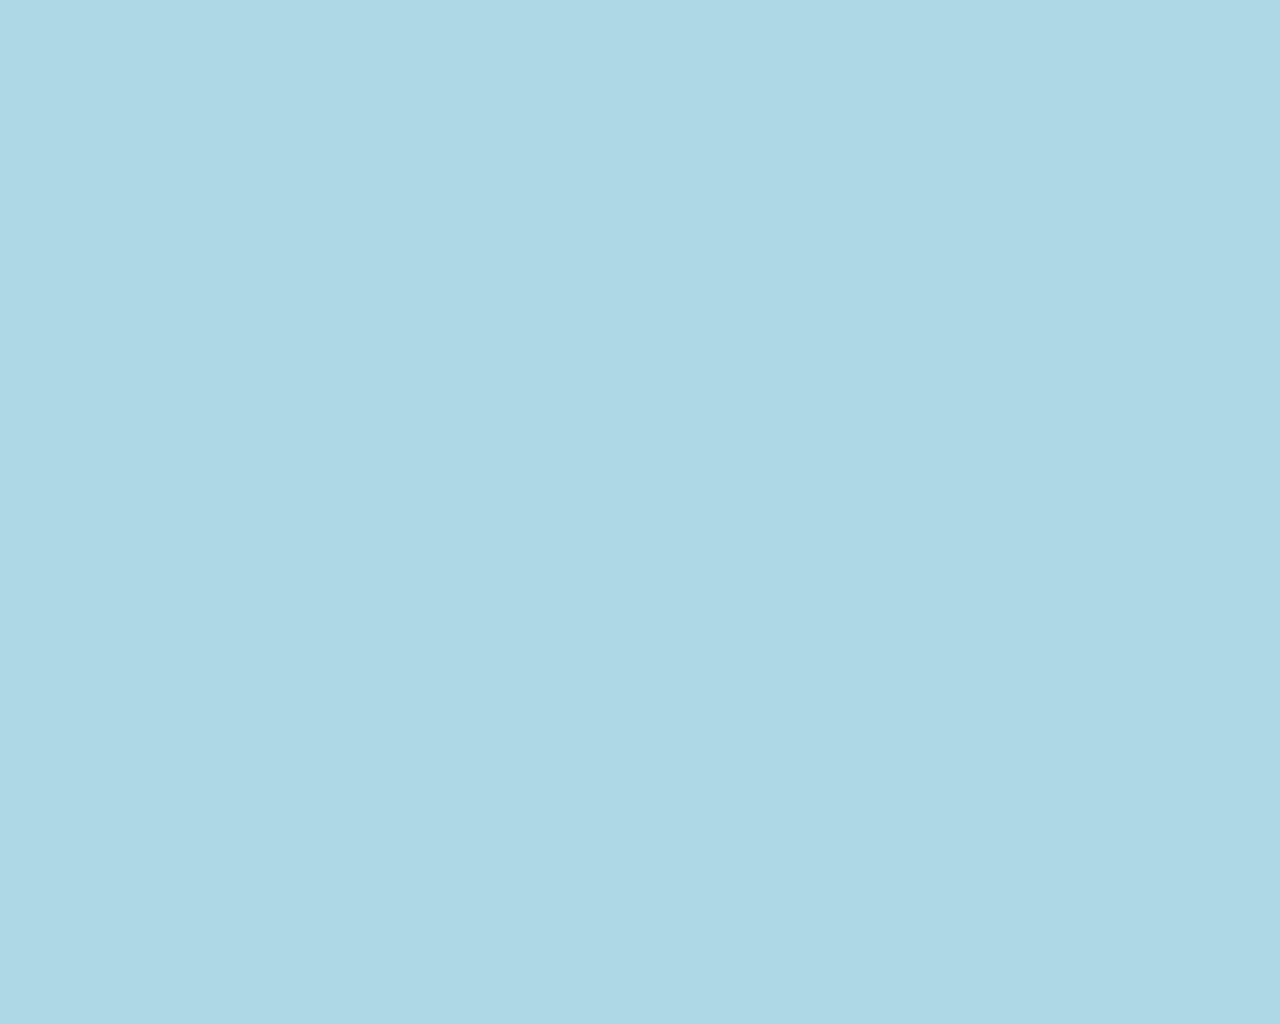 Free 1280x1024 resolution Light Blue solid color background view and